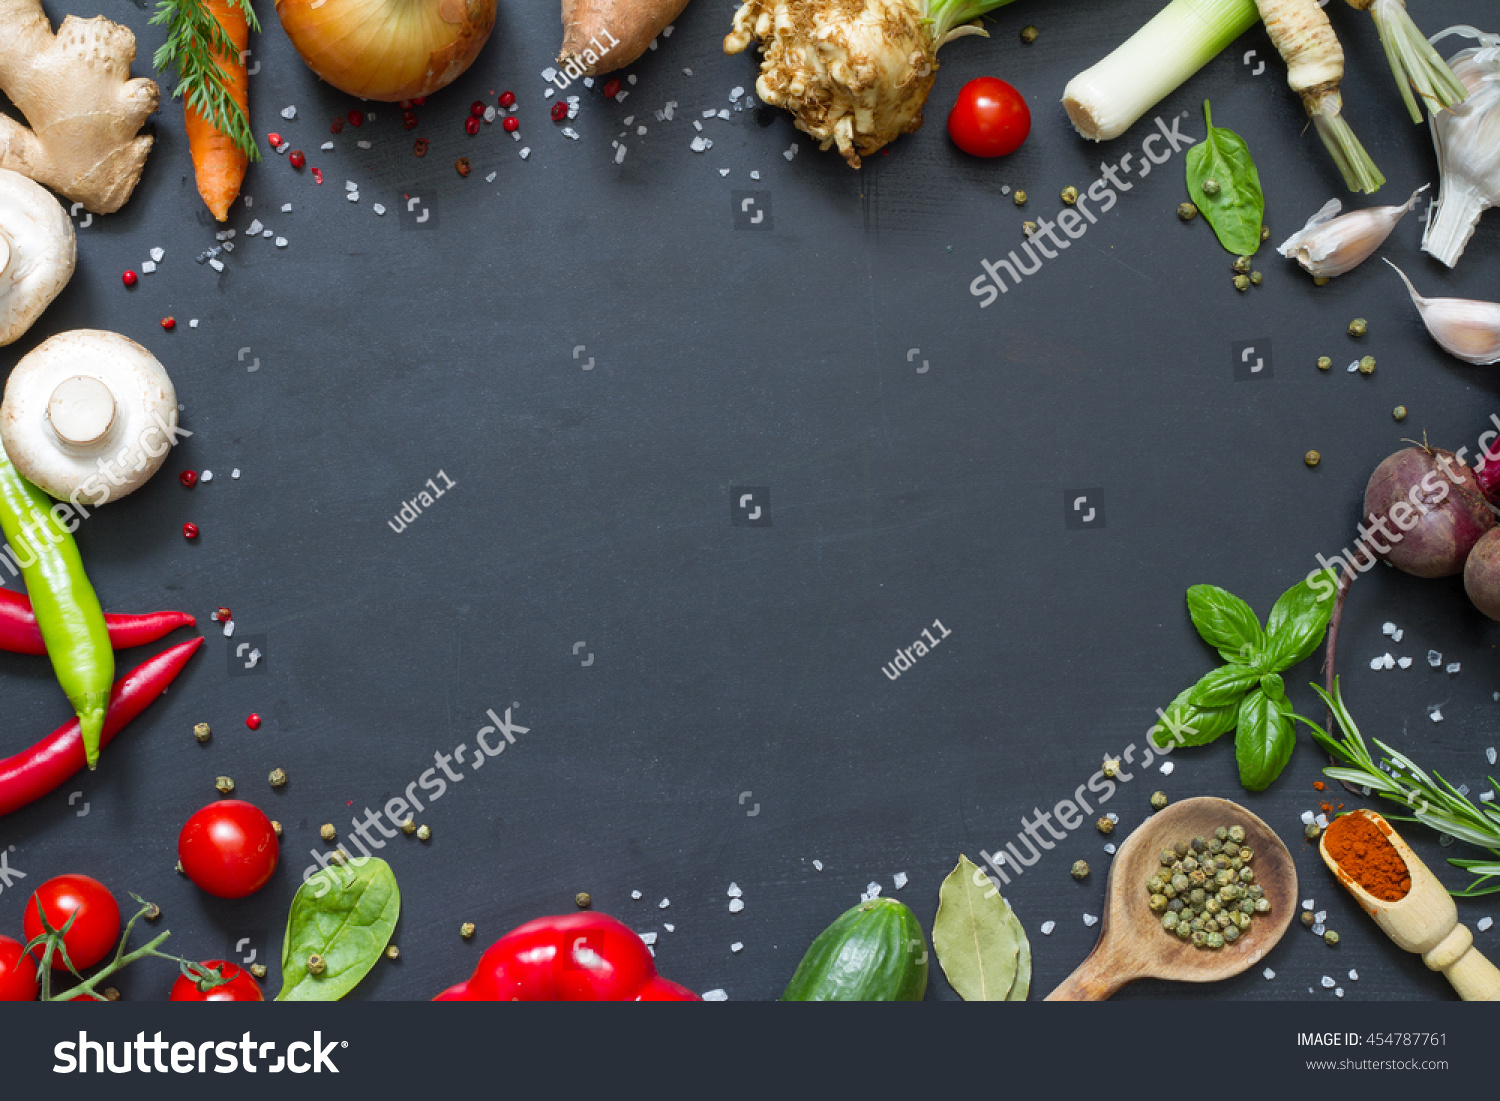 Menu Food Culinary Frame Concept On Black Background Stock Photo ...